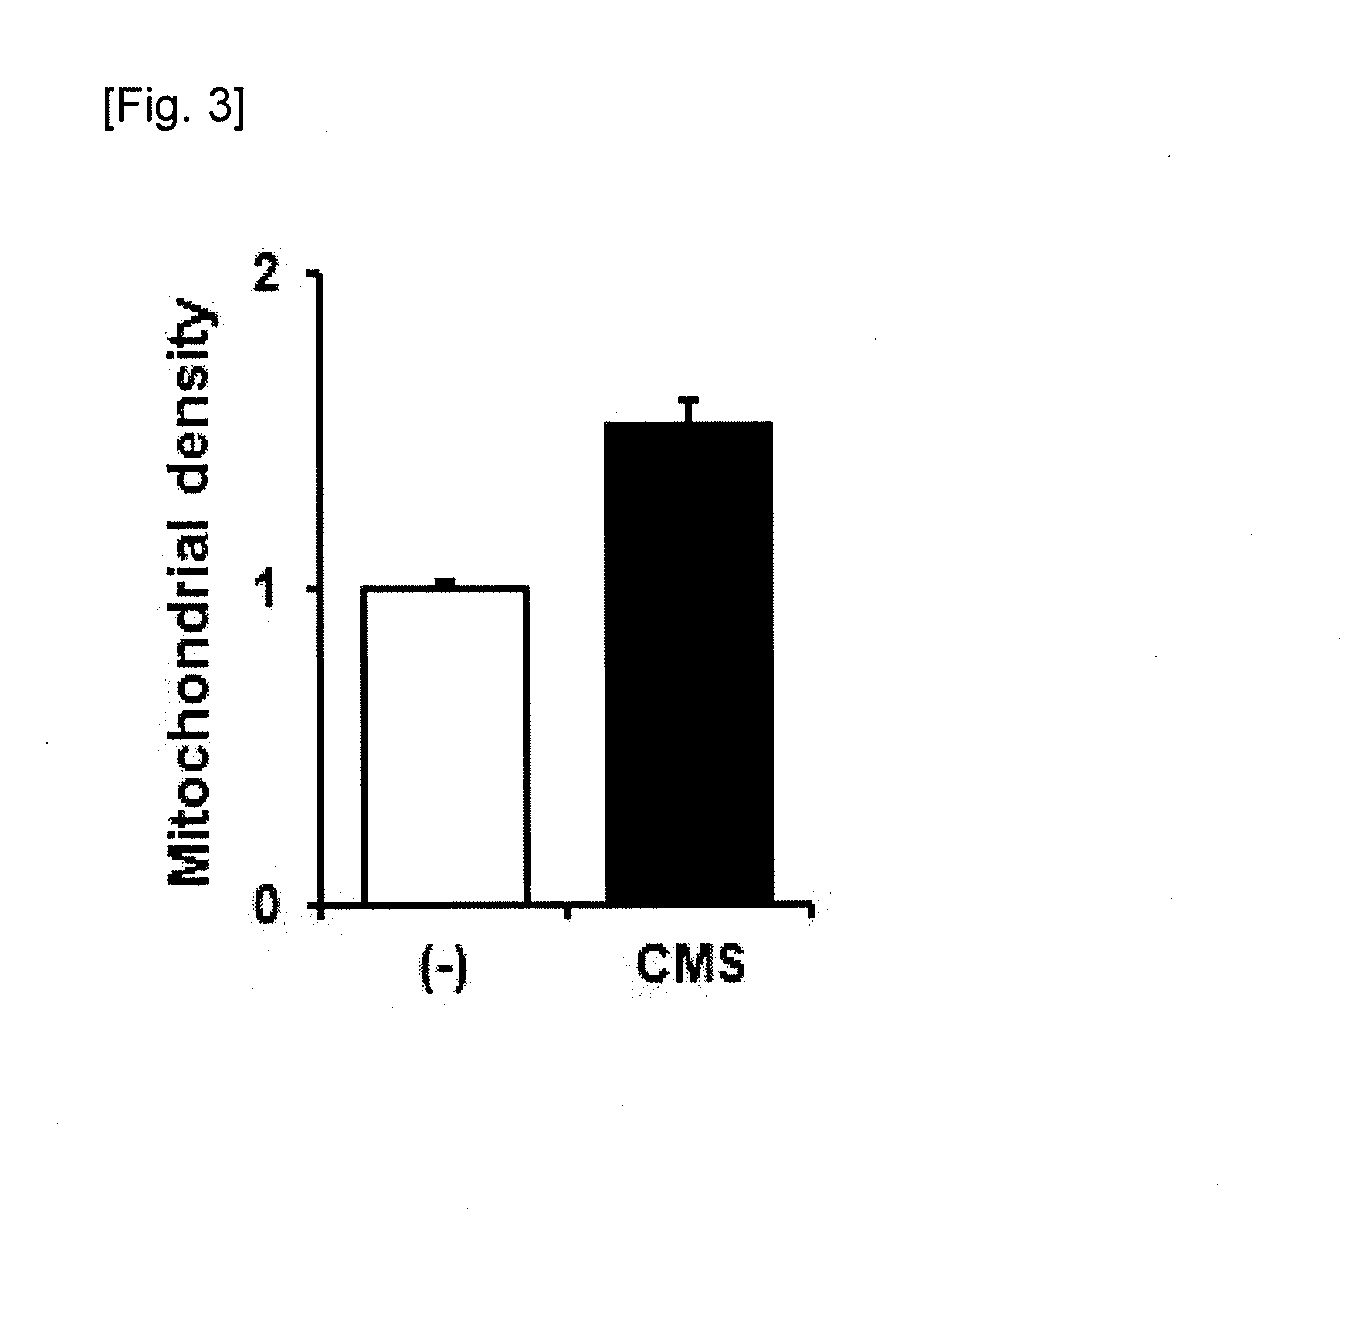 Composition comprising coumestrol or a bean extract containing coumestrol